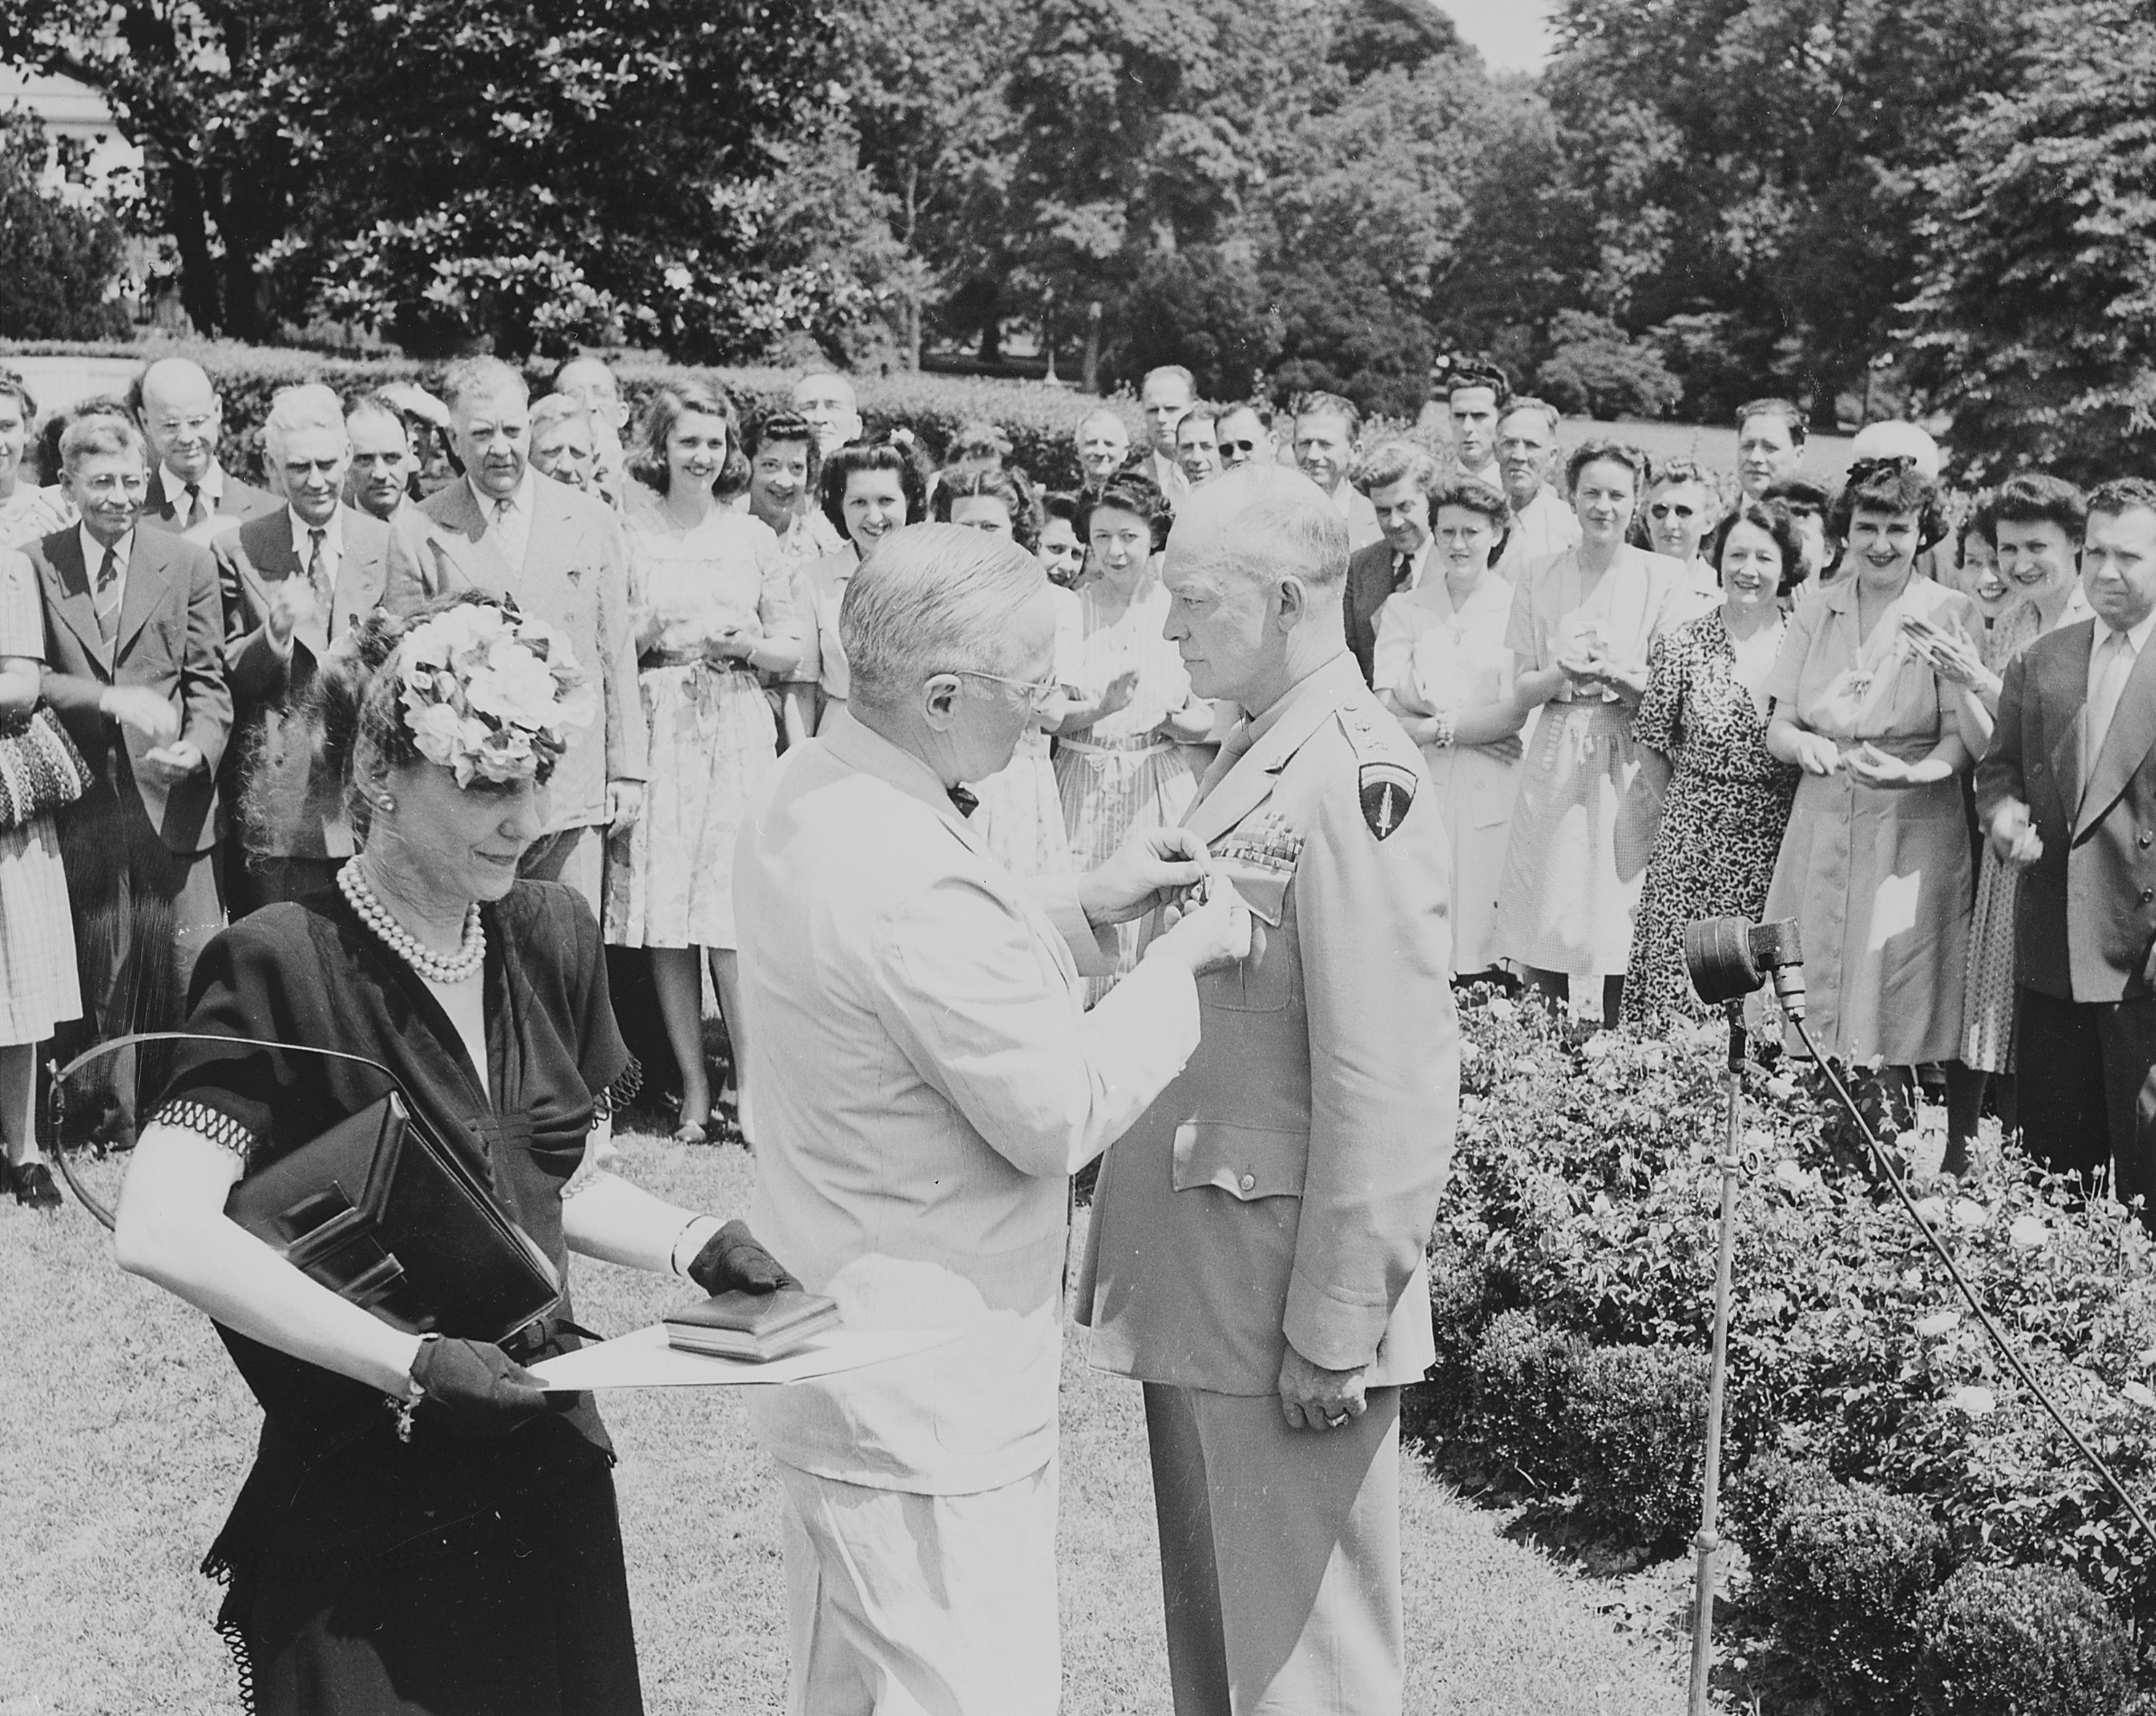 US President Harry Truman decorating General Dwight Eisenhower with the Distinguished Service Medal, Washington DC, United States, 18 Jun 1945, photo 3 of 6